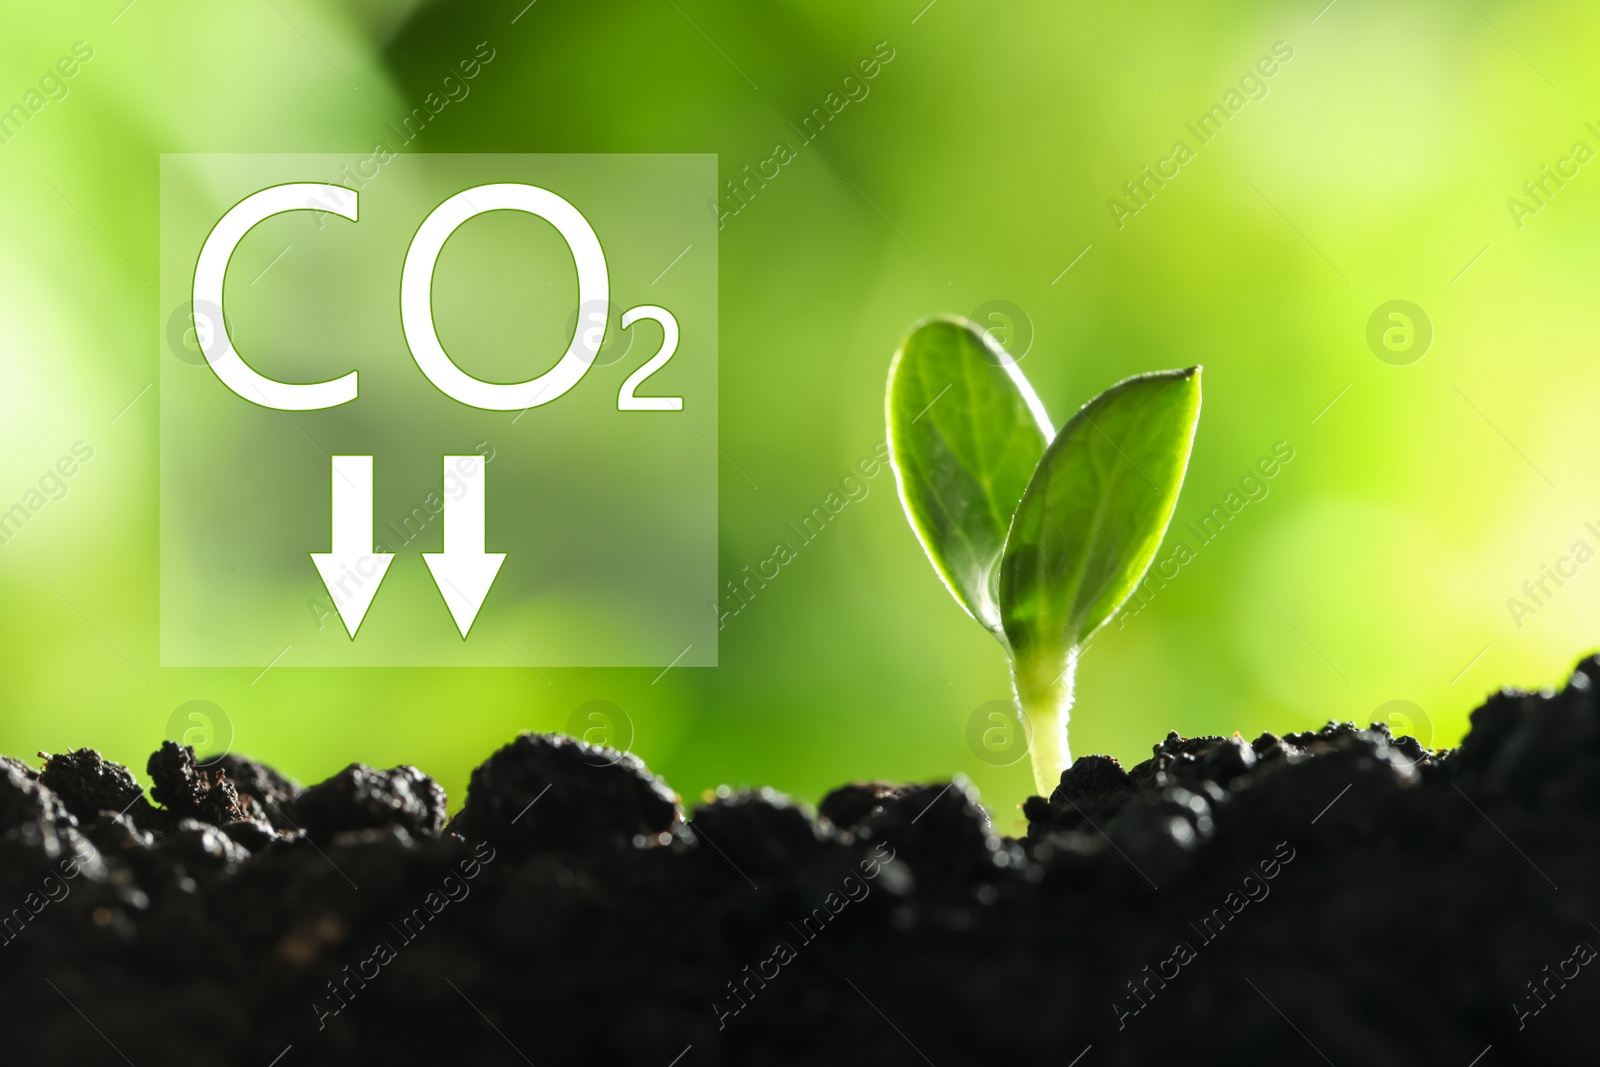 Image of Reduce CO2 emissions. Fresh green seedling growing outdoors, closeup